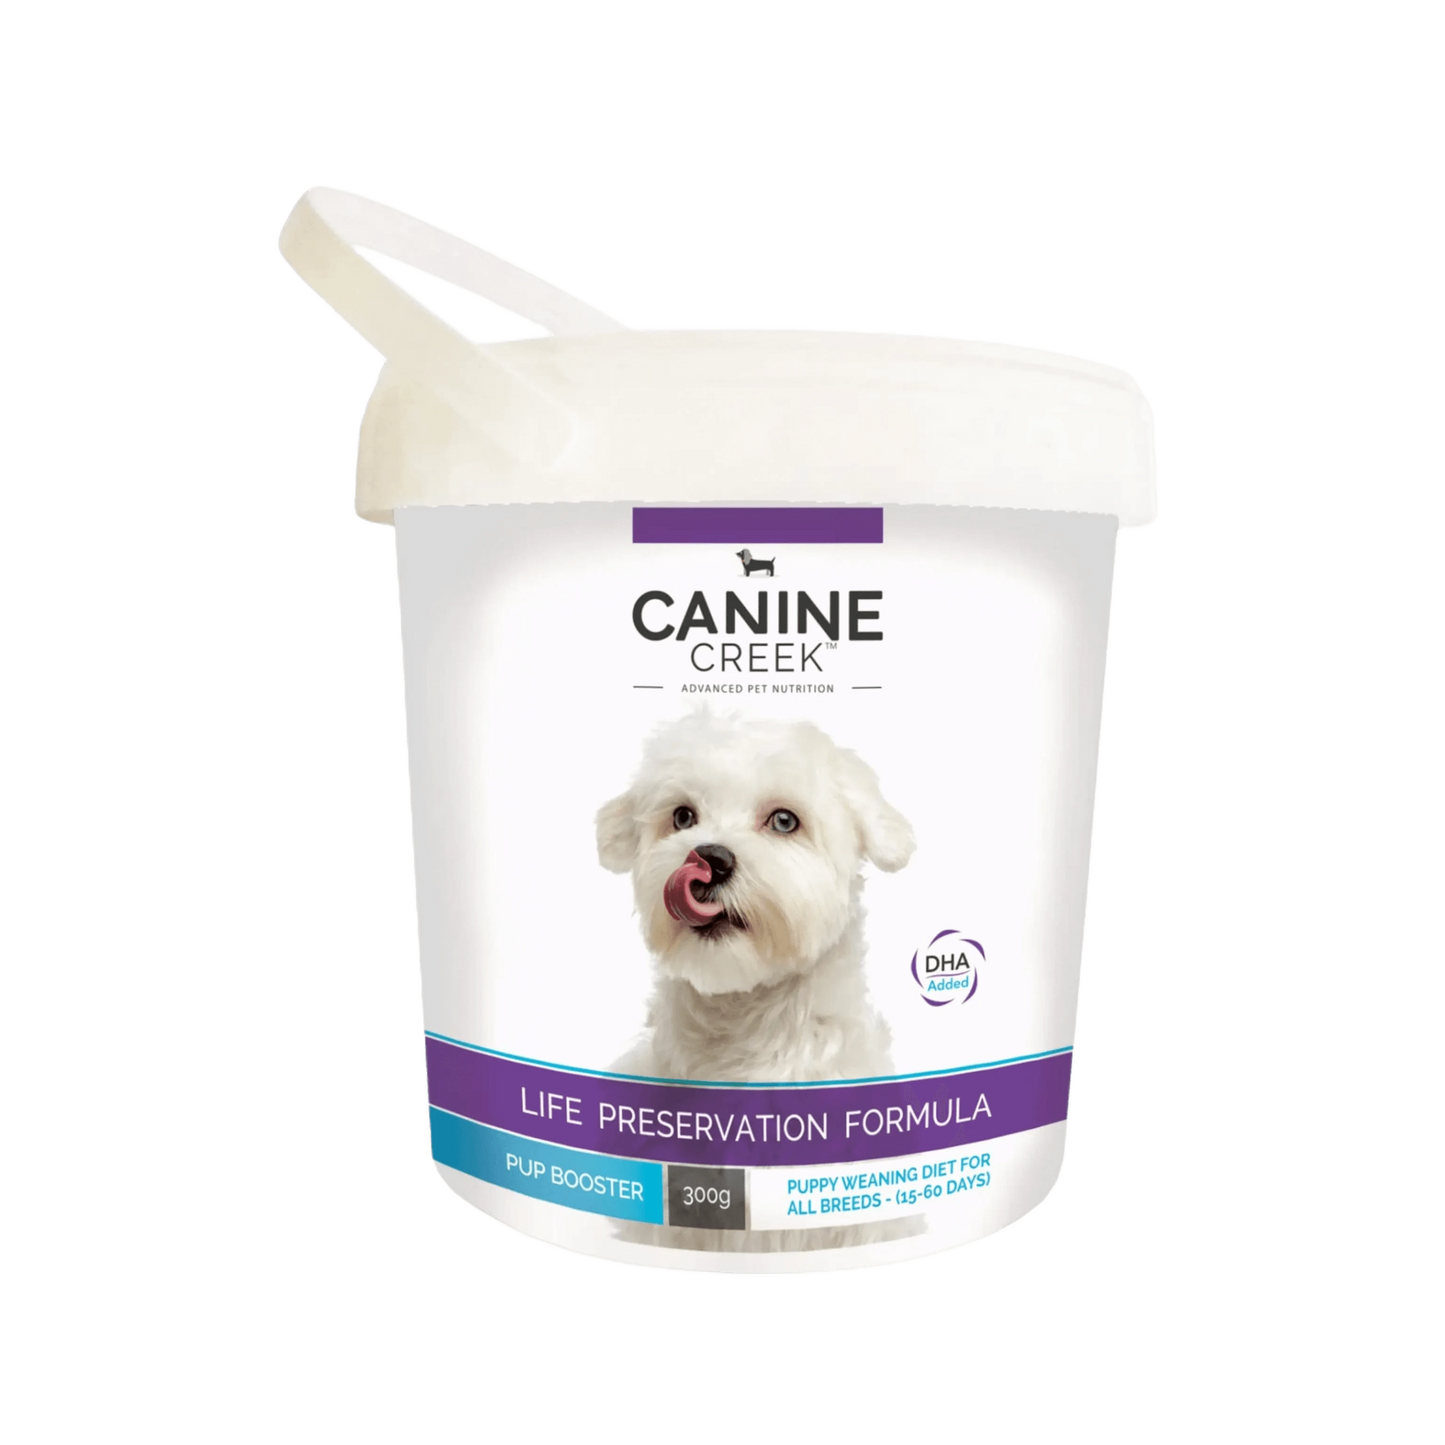 CANINE CREEK PUP BOOSTER 300GM